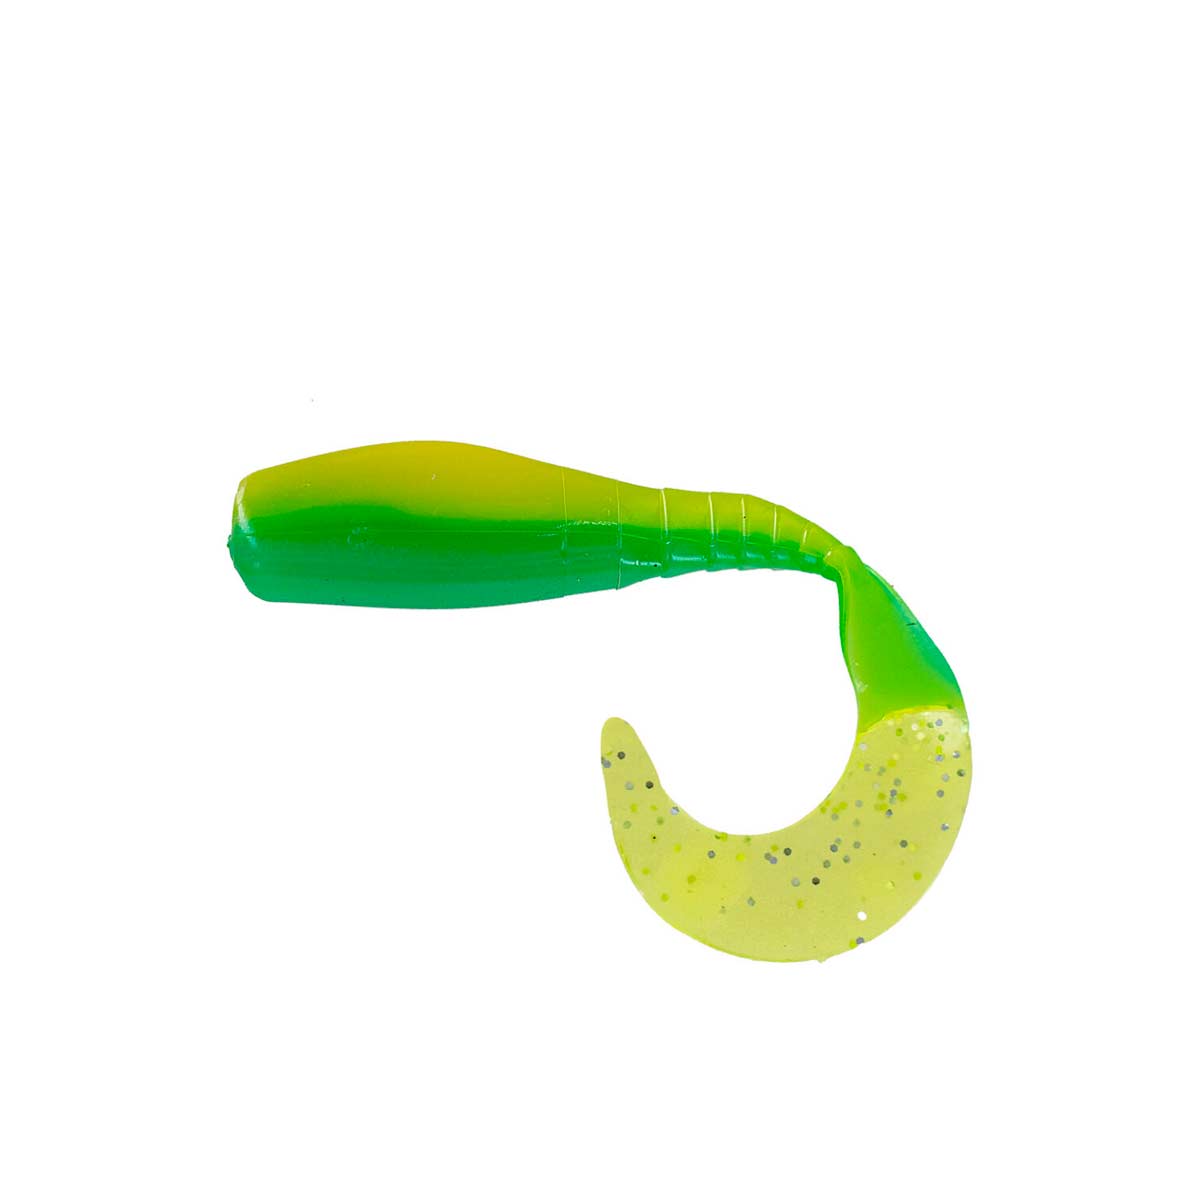 Curly Tail Crappie Minnow_Tractor Green Glo